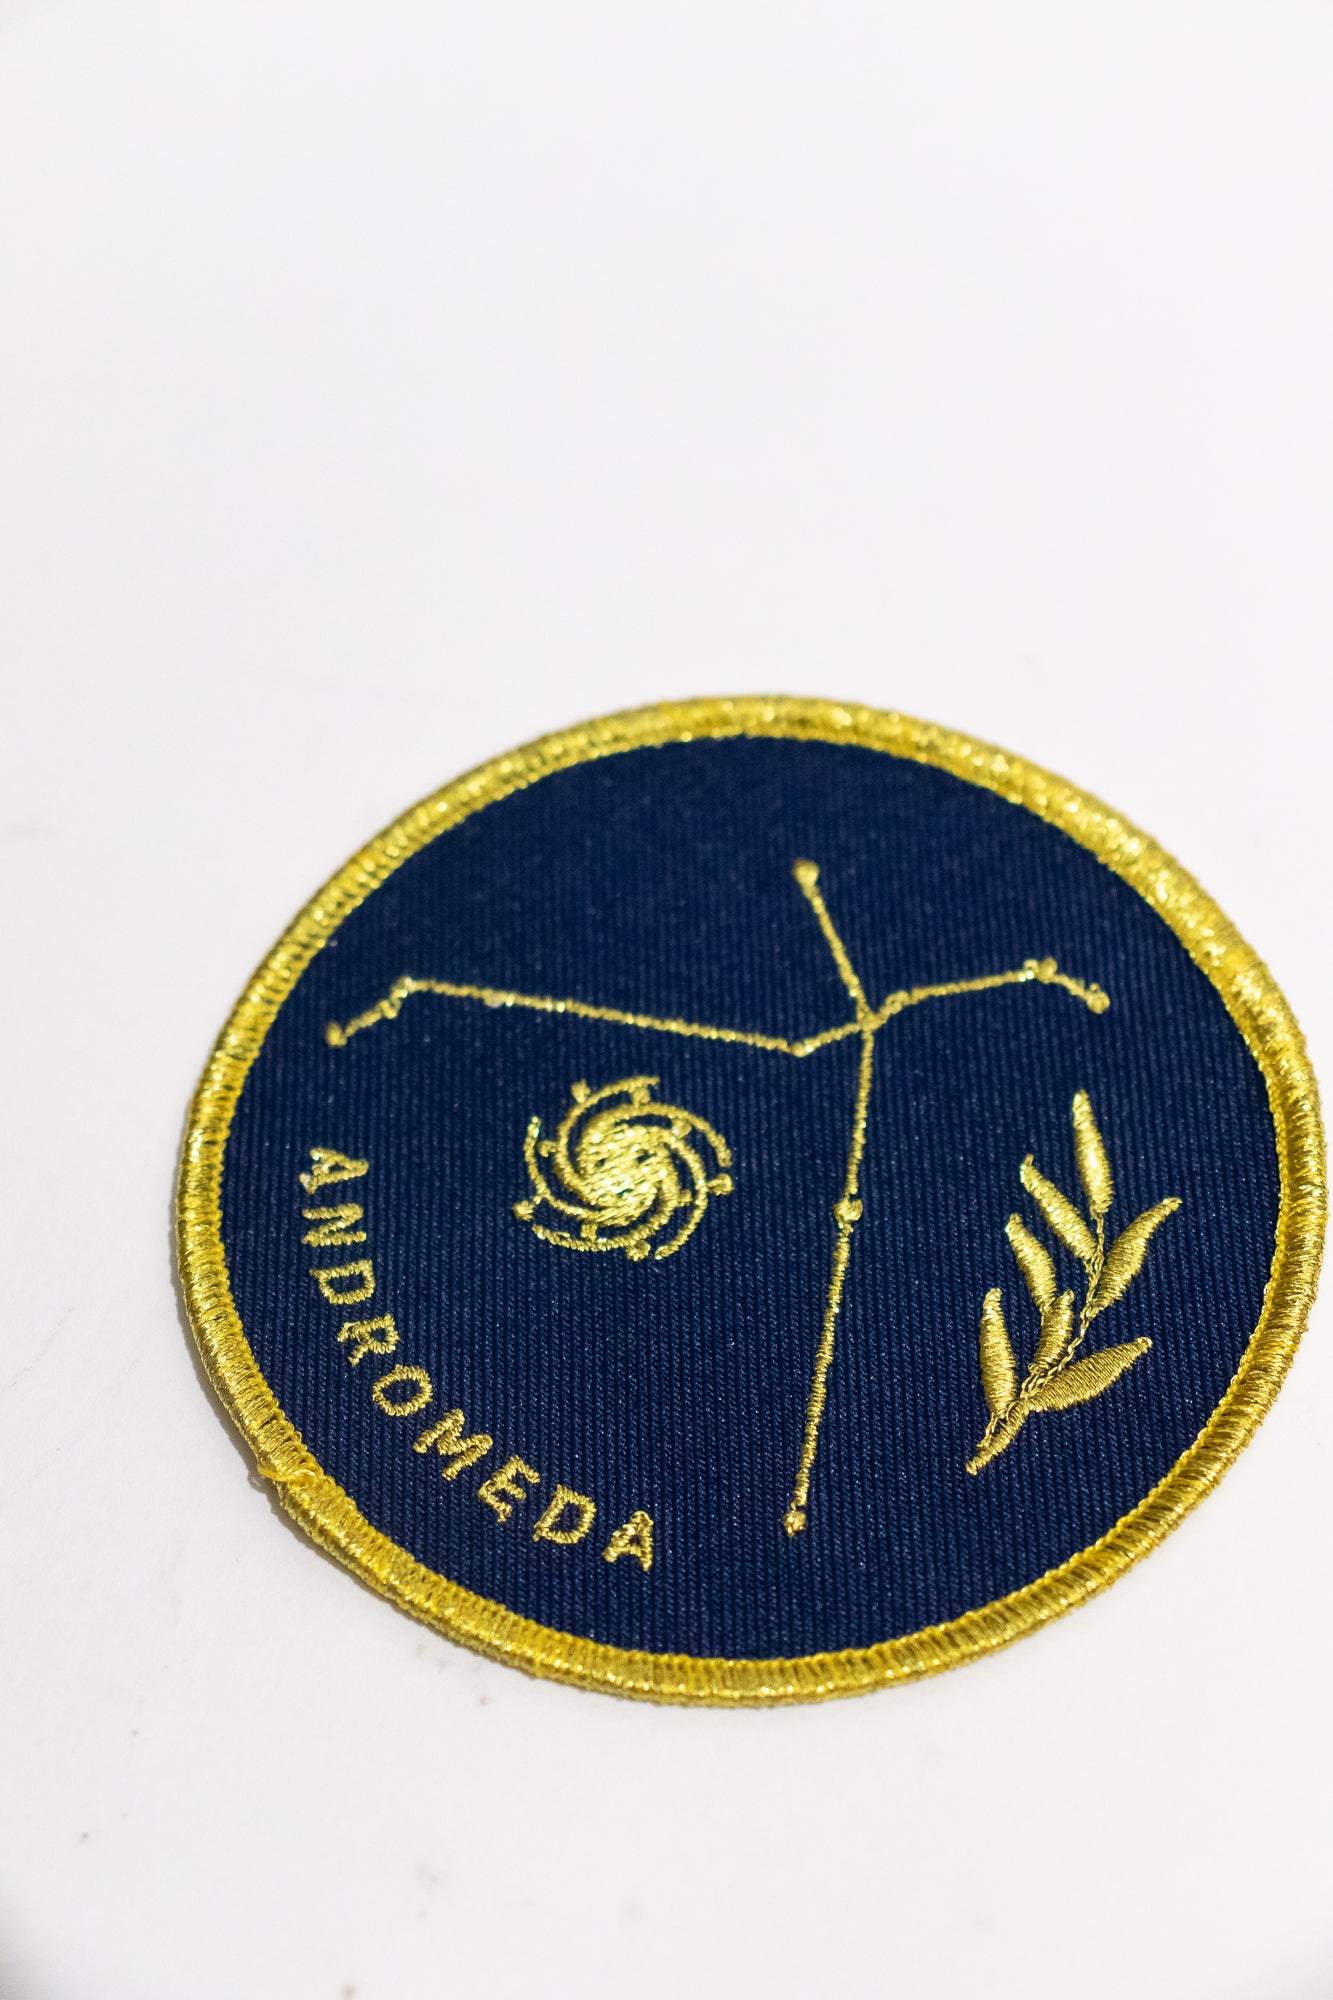 Andromeda Patch